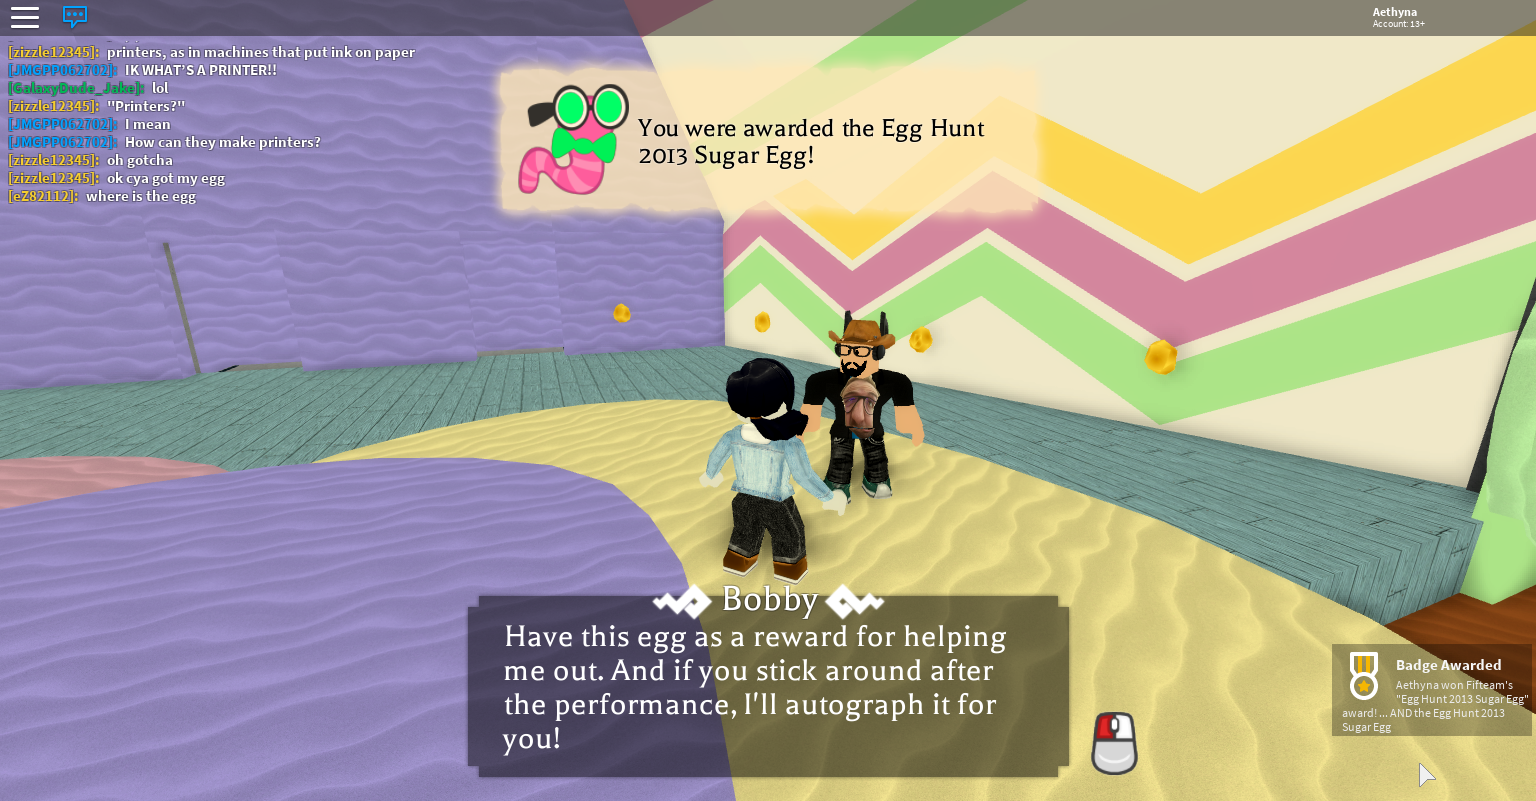 Roblox Egg Hunt Presegg How To Get Free Robux 2017 No Human - roblox egg hunt the great yolktales radiojh games youtube